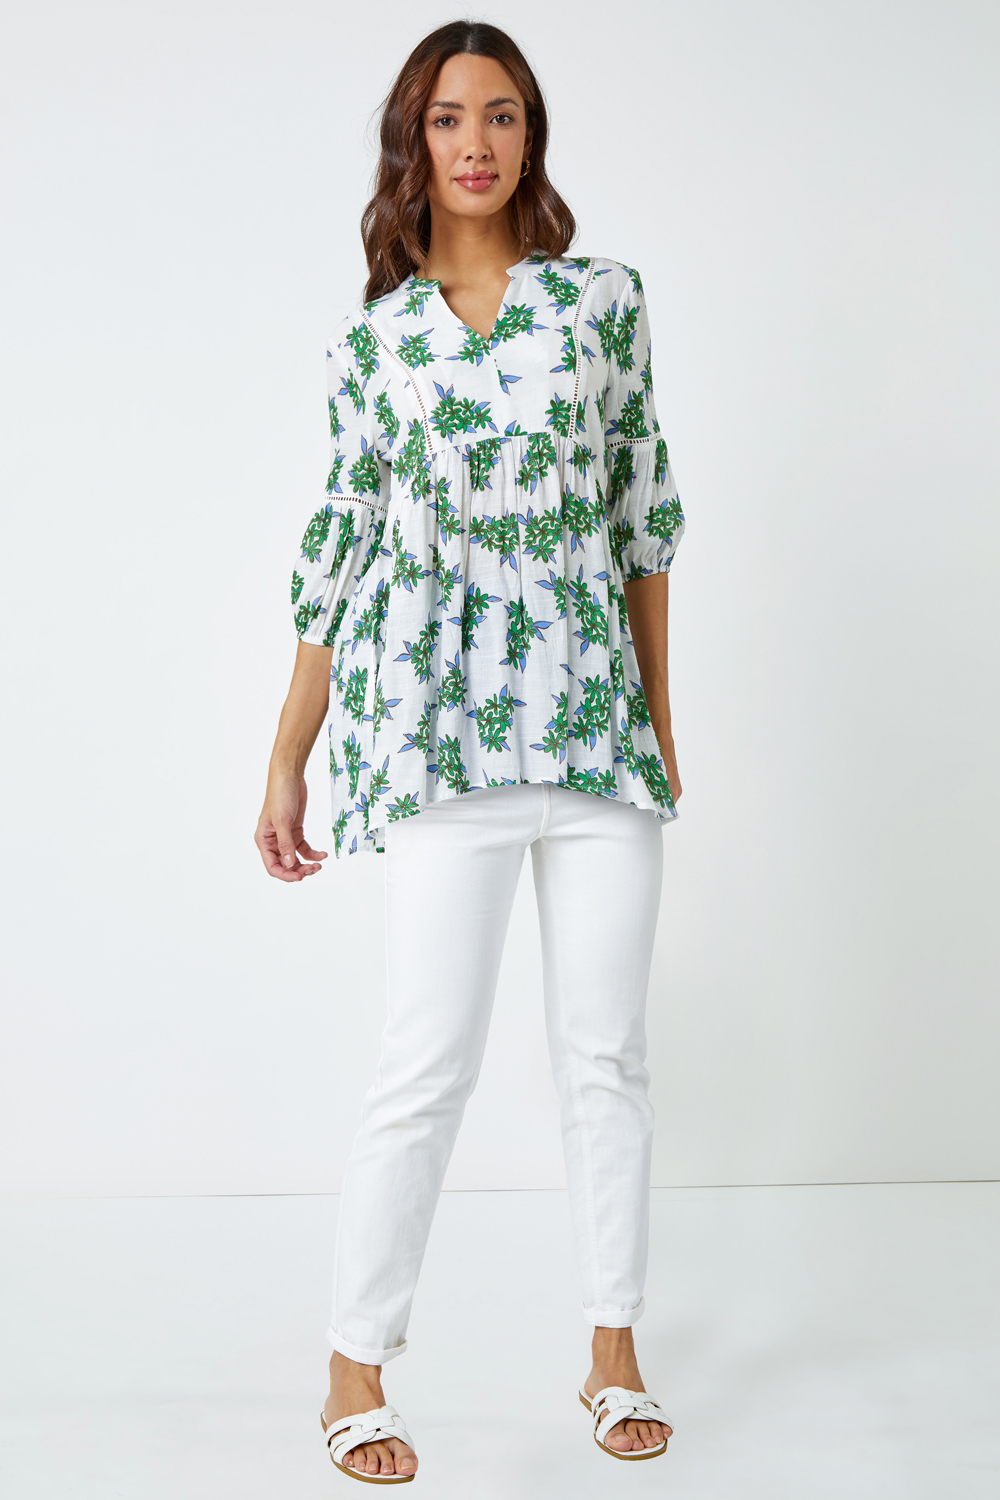 Green Floral Print Smock Tunic Top, Image 4 of 5